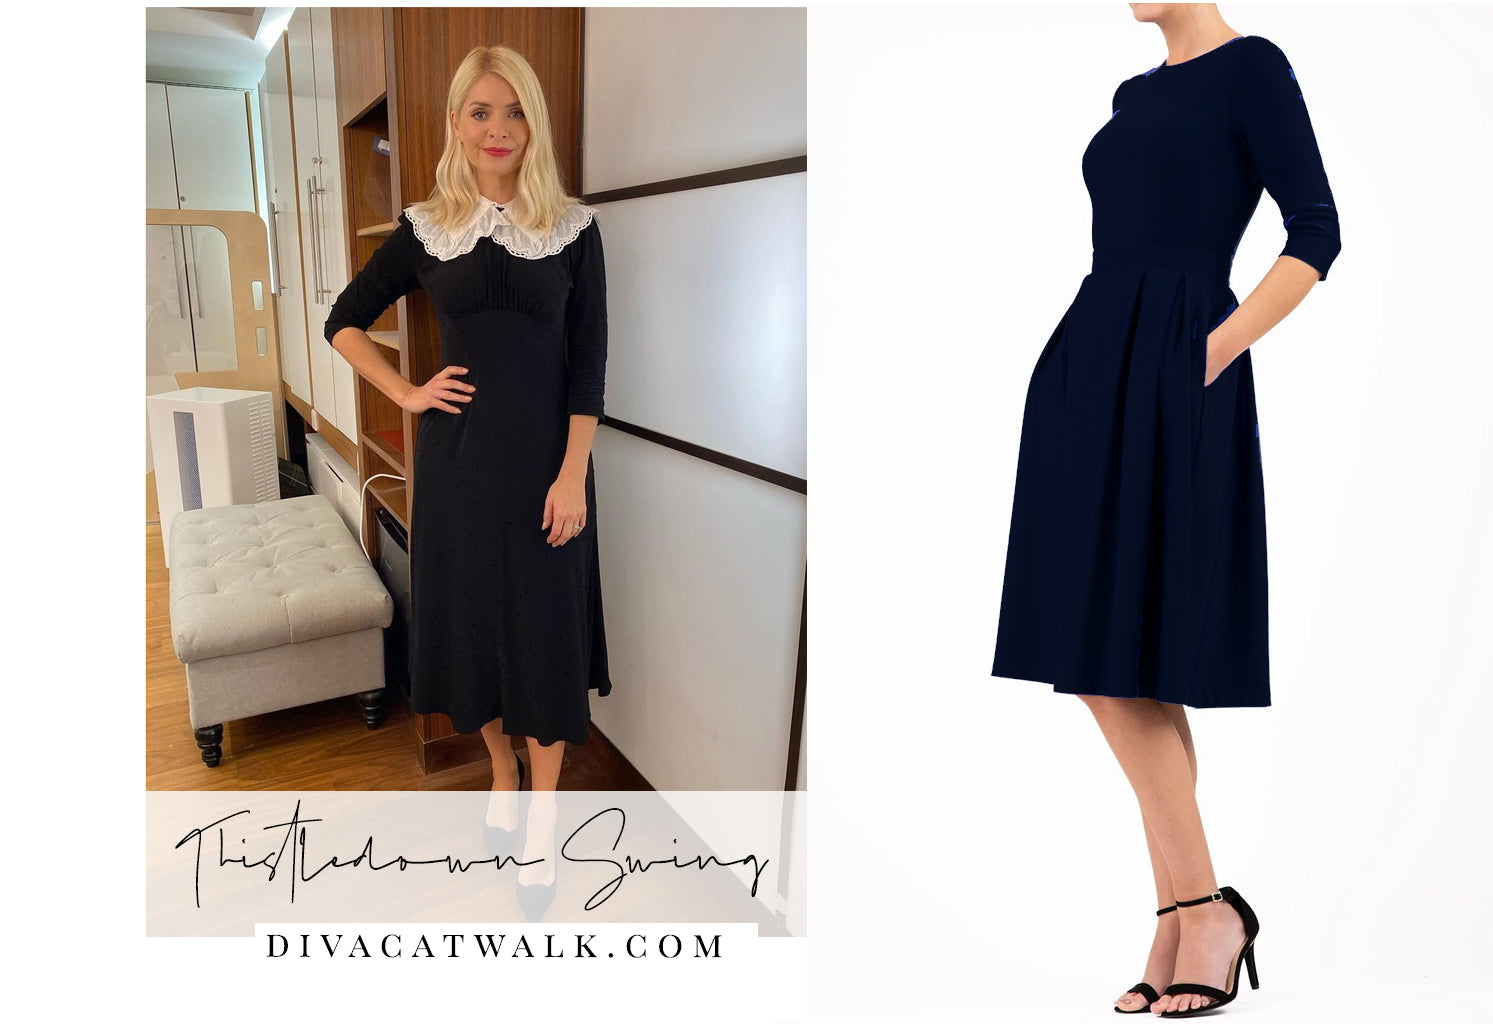  holly willoughby pictured in an black dress with white collar, with an attached image of a similar dress available from Diva Catwalk.